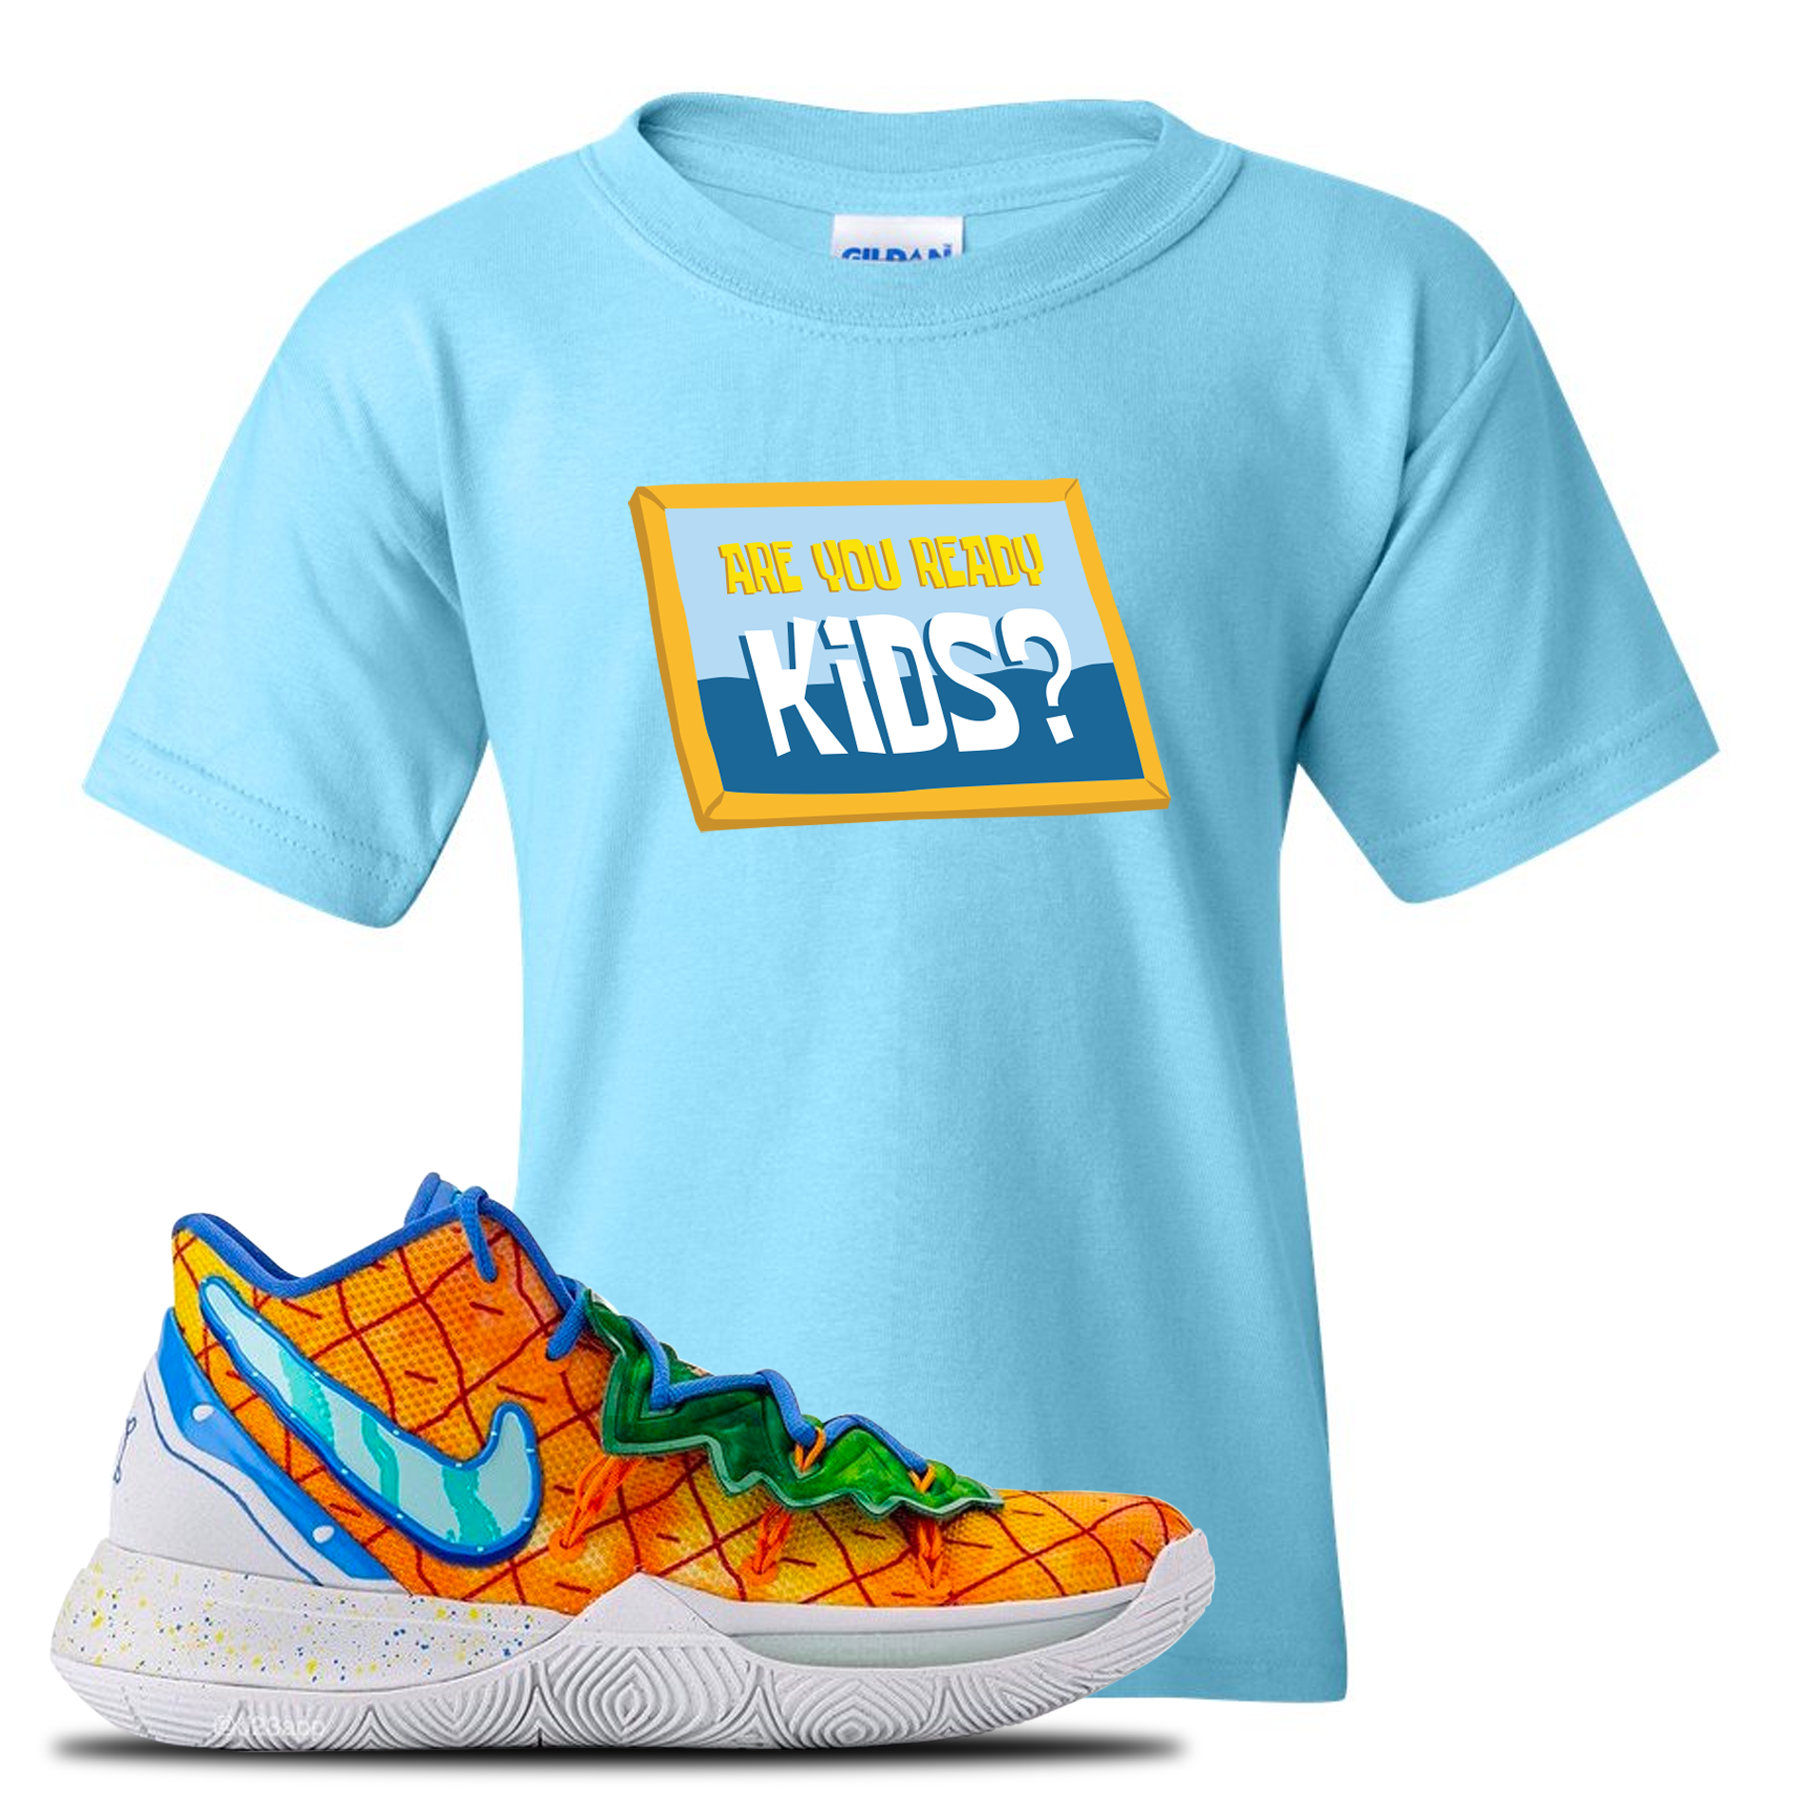 Kyrie 5 Pineapple House Are You Ready Kids? Sky Blue Sneaker Hook Up Kid's T-Shirt